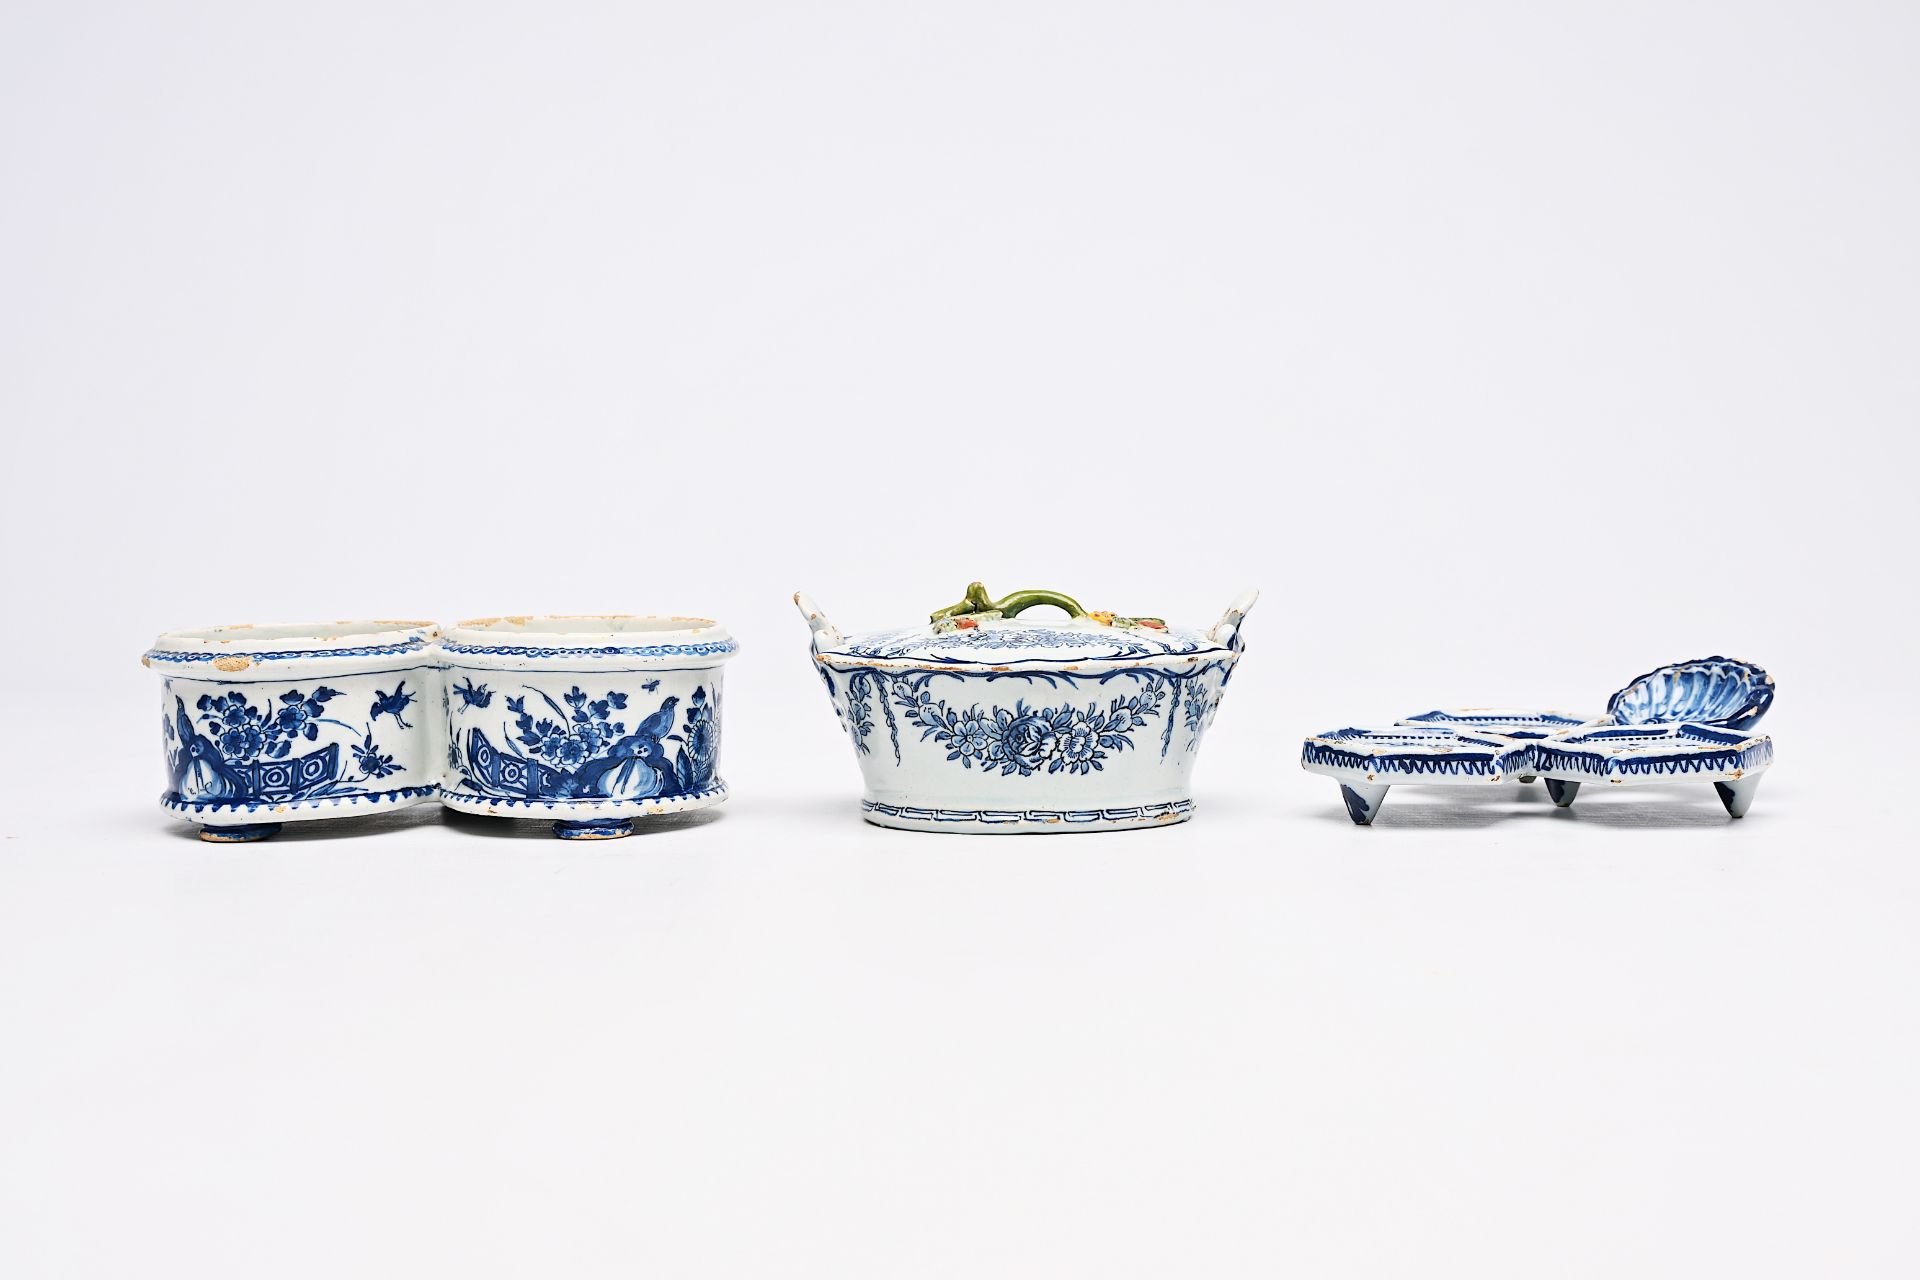 A Dutch Delft blue and white butter tub, an oil and vinegar holder and a spice dish with floral desi - Bild 2 aus 9